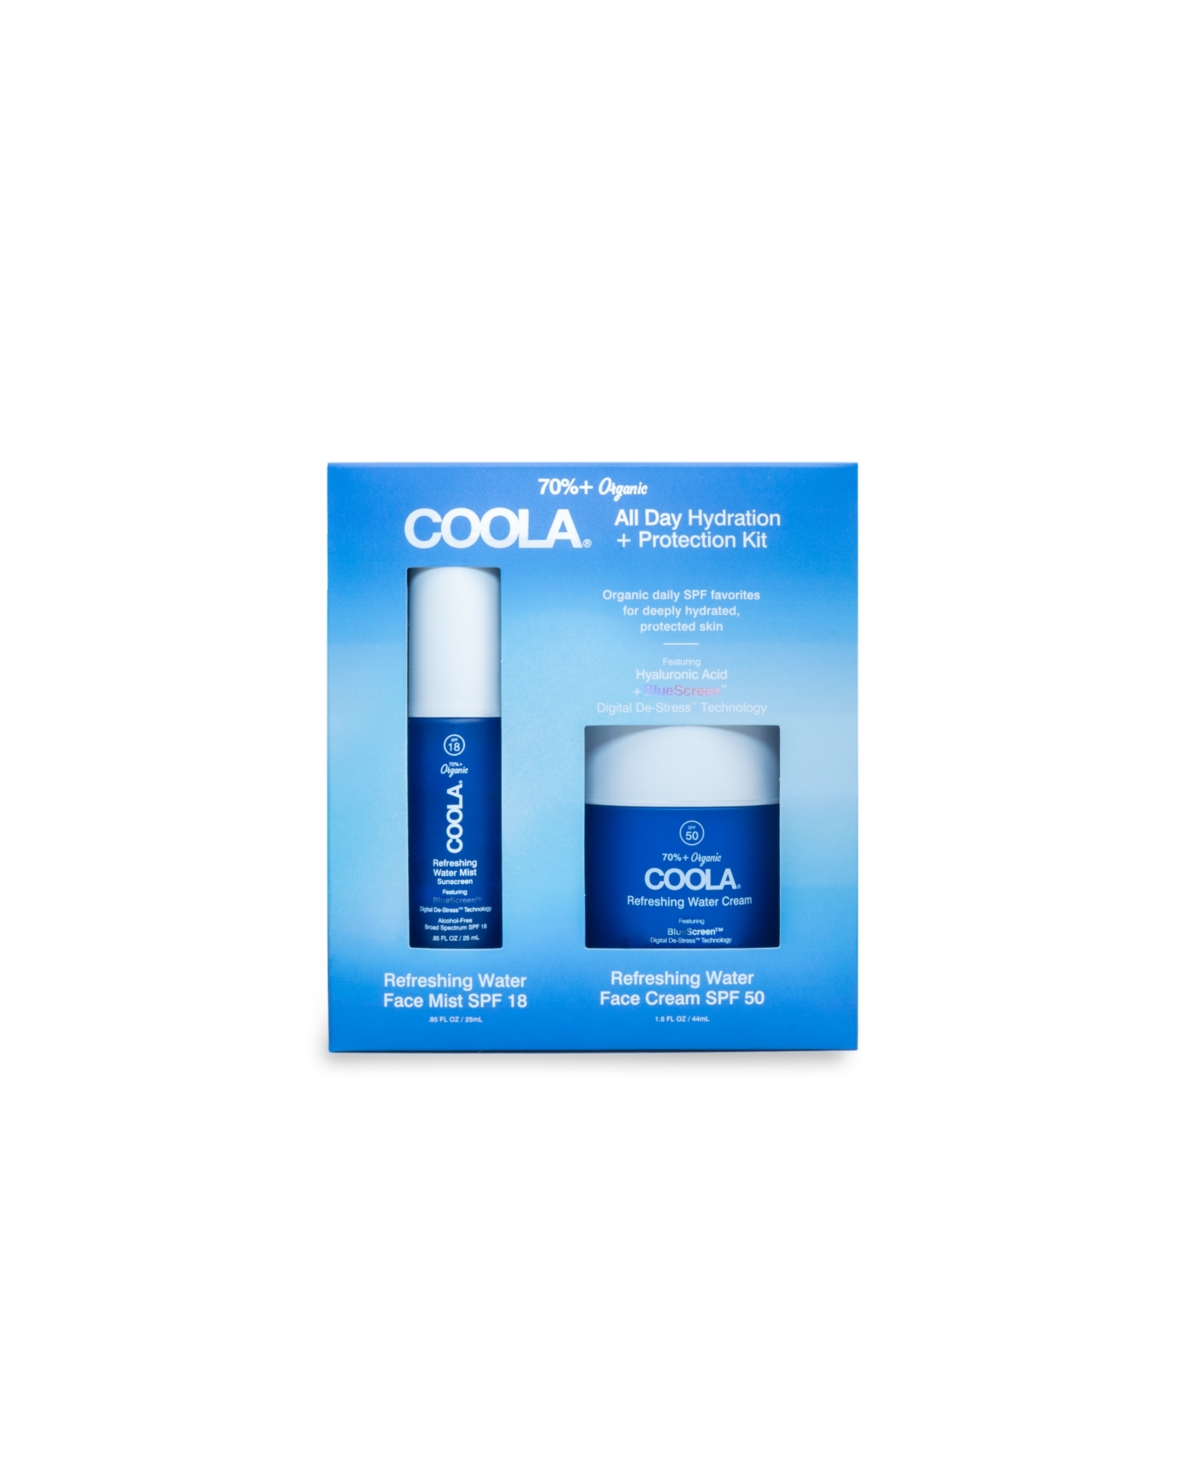 Coola All Day Hydration + Protection Kit ($68 Value)